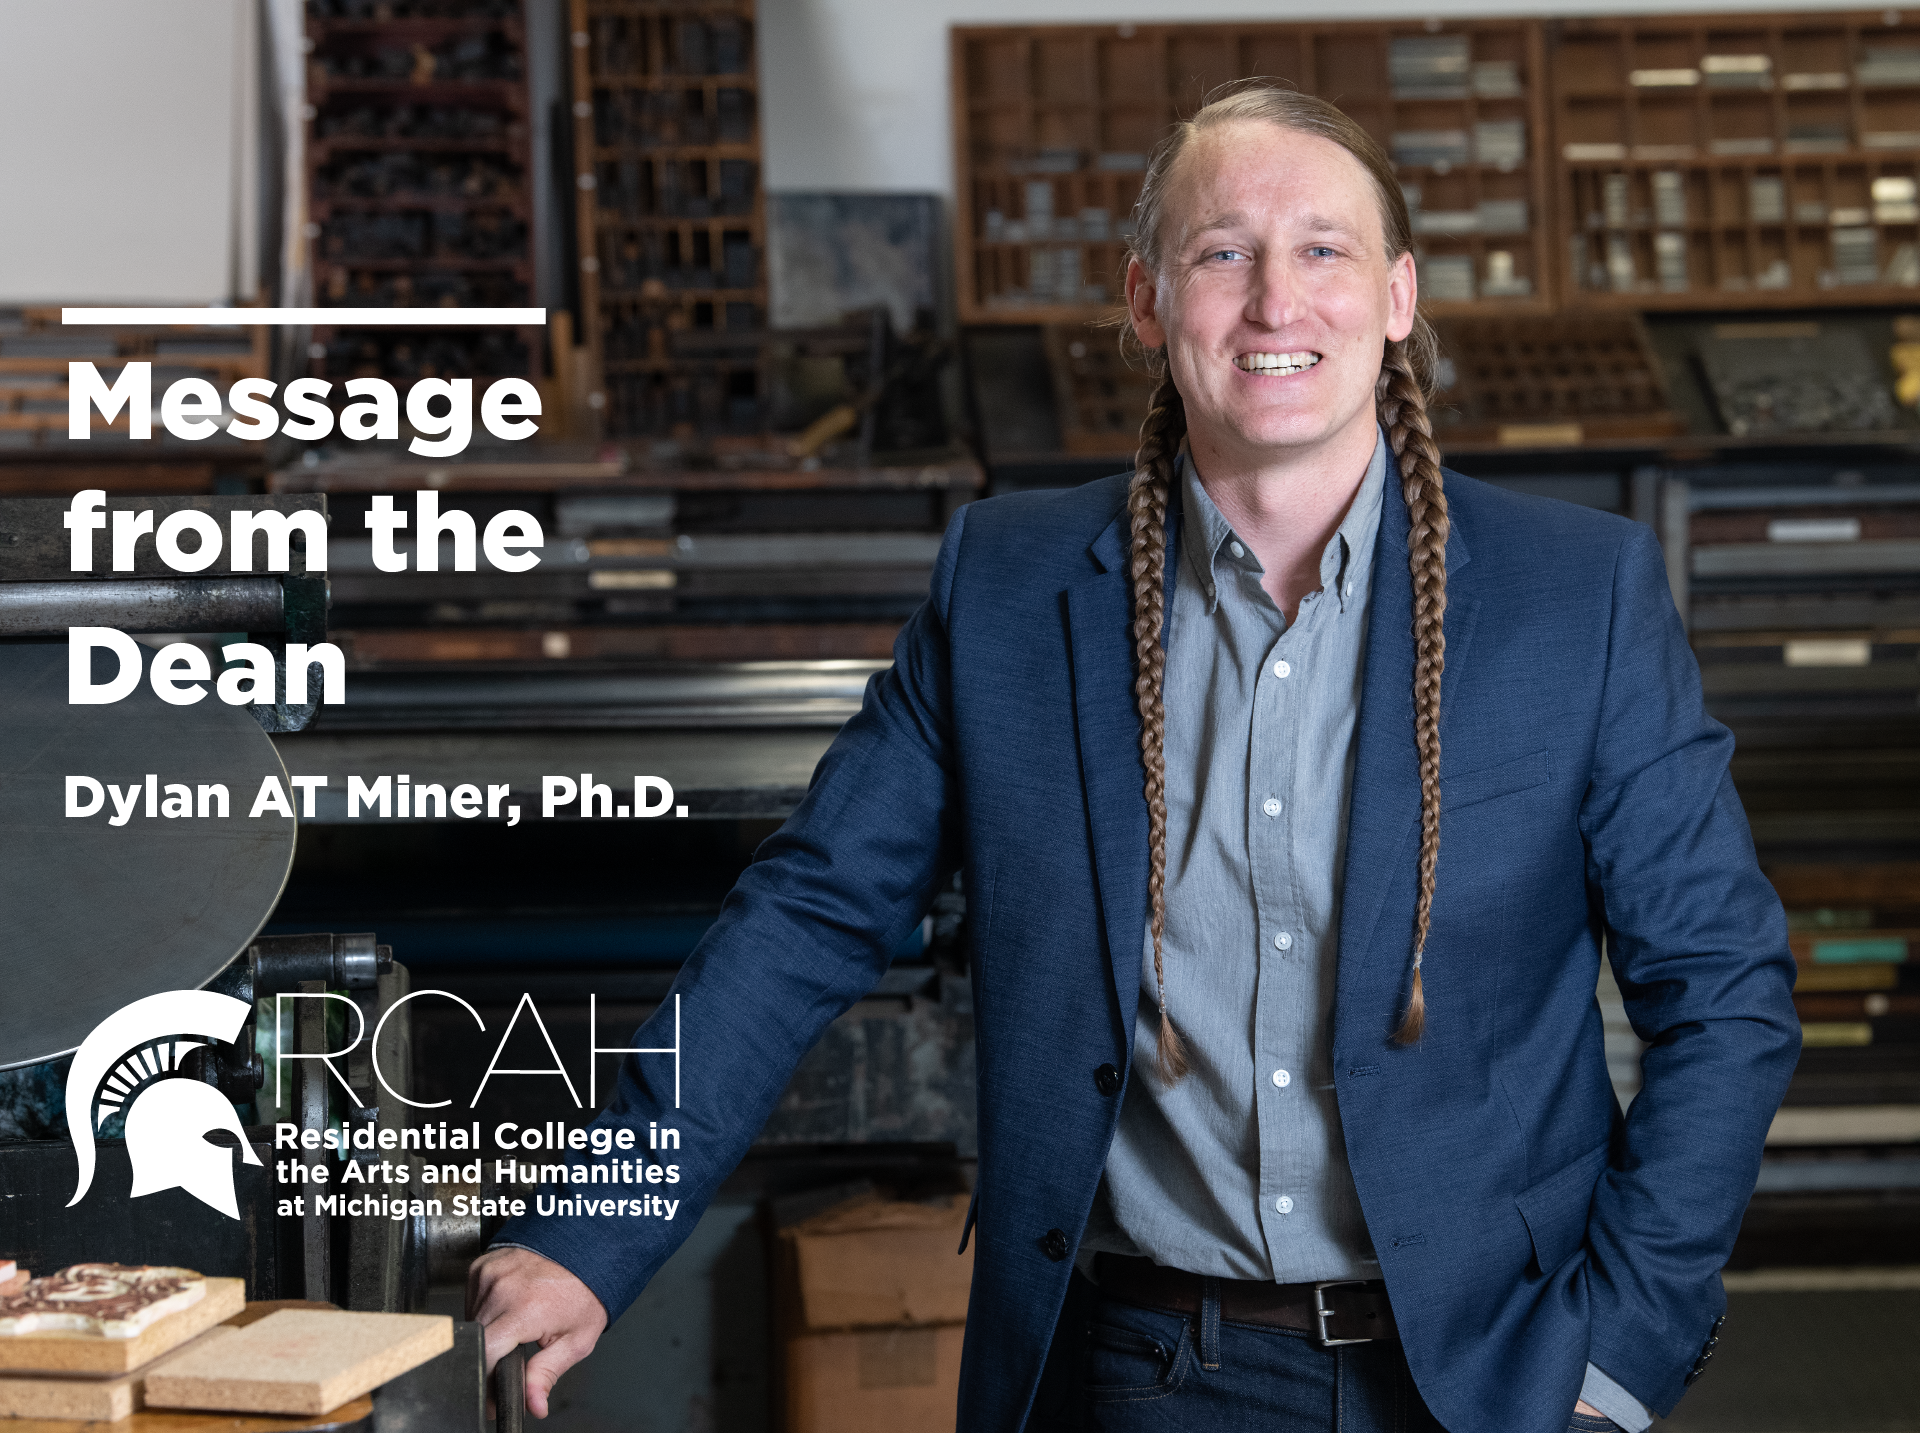 Message from the RCAH Dean, Dylan Miner